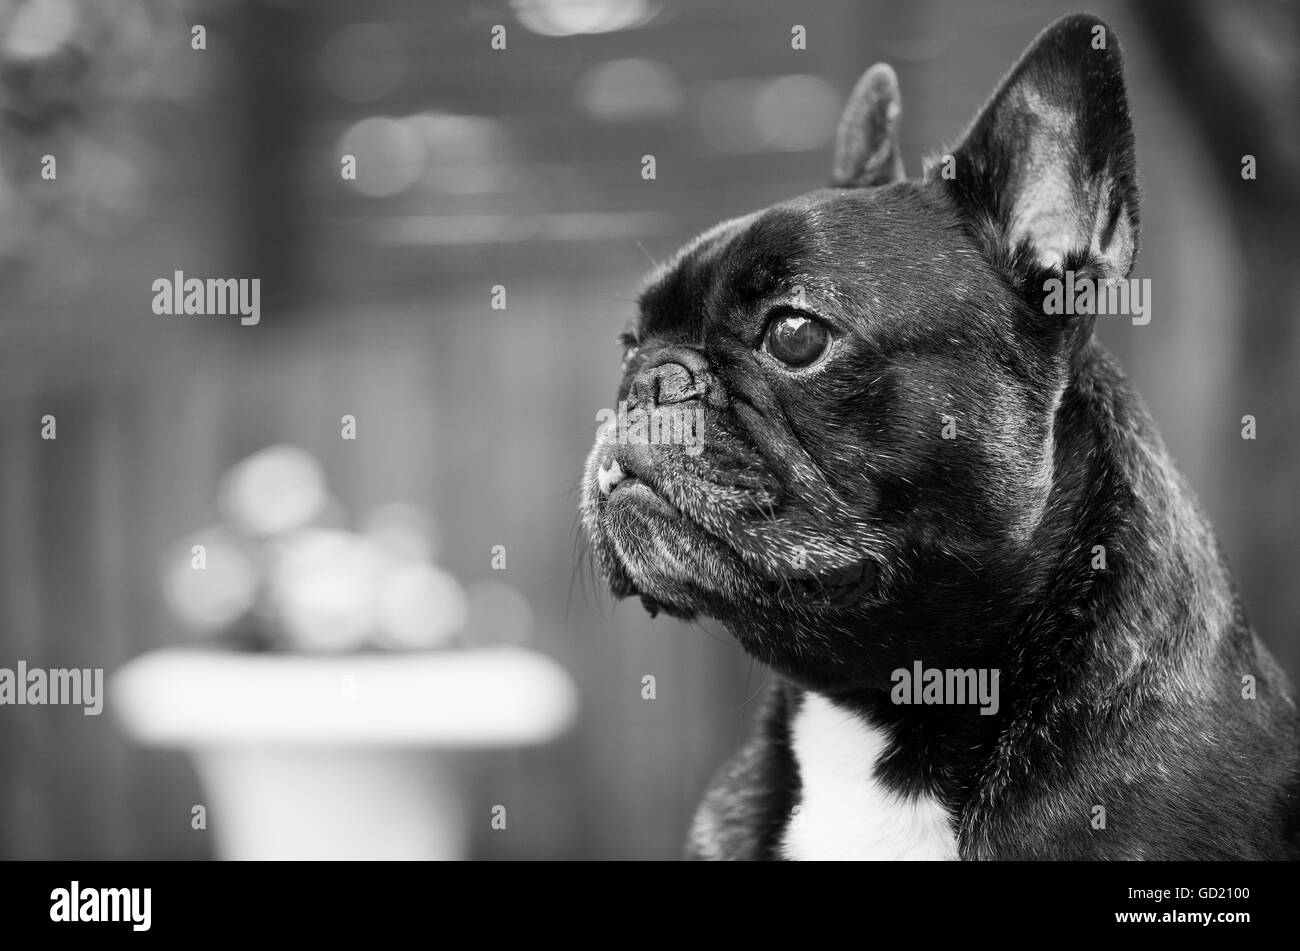 French Bulldog, also known as a 'Frenchie' Stock Photo - Alamy